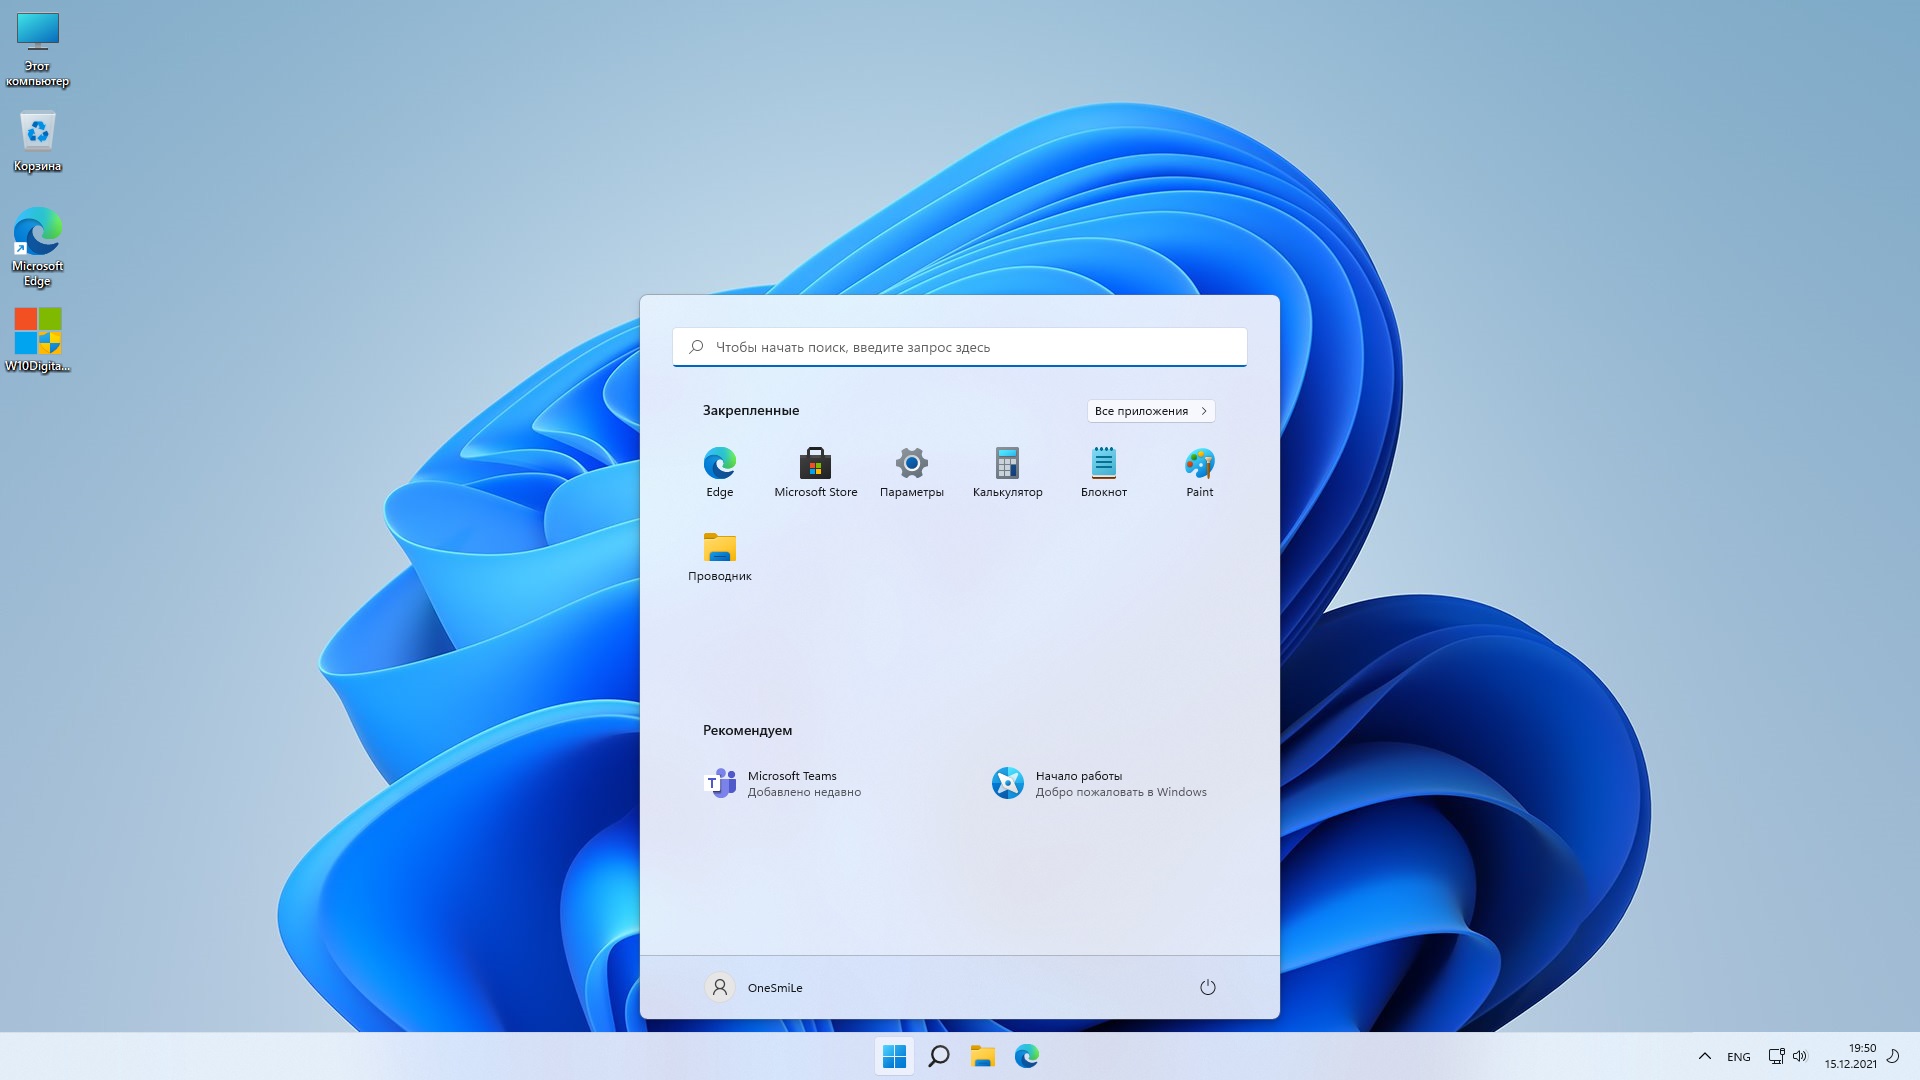 Windows 11 PRO 21H2 x64 Rus by OneSmiLe [22000.376]